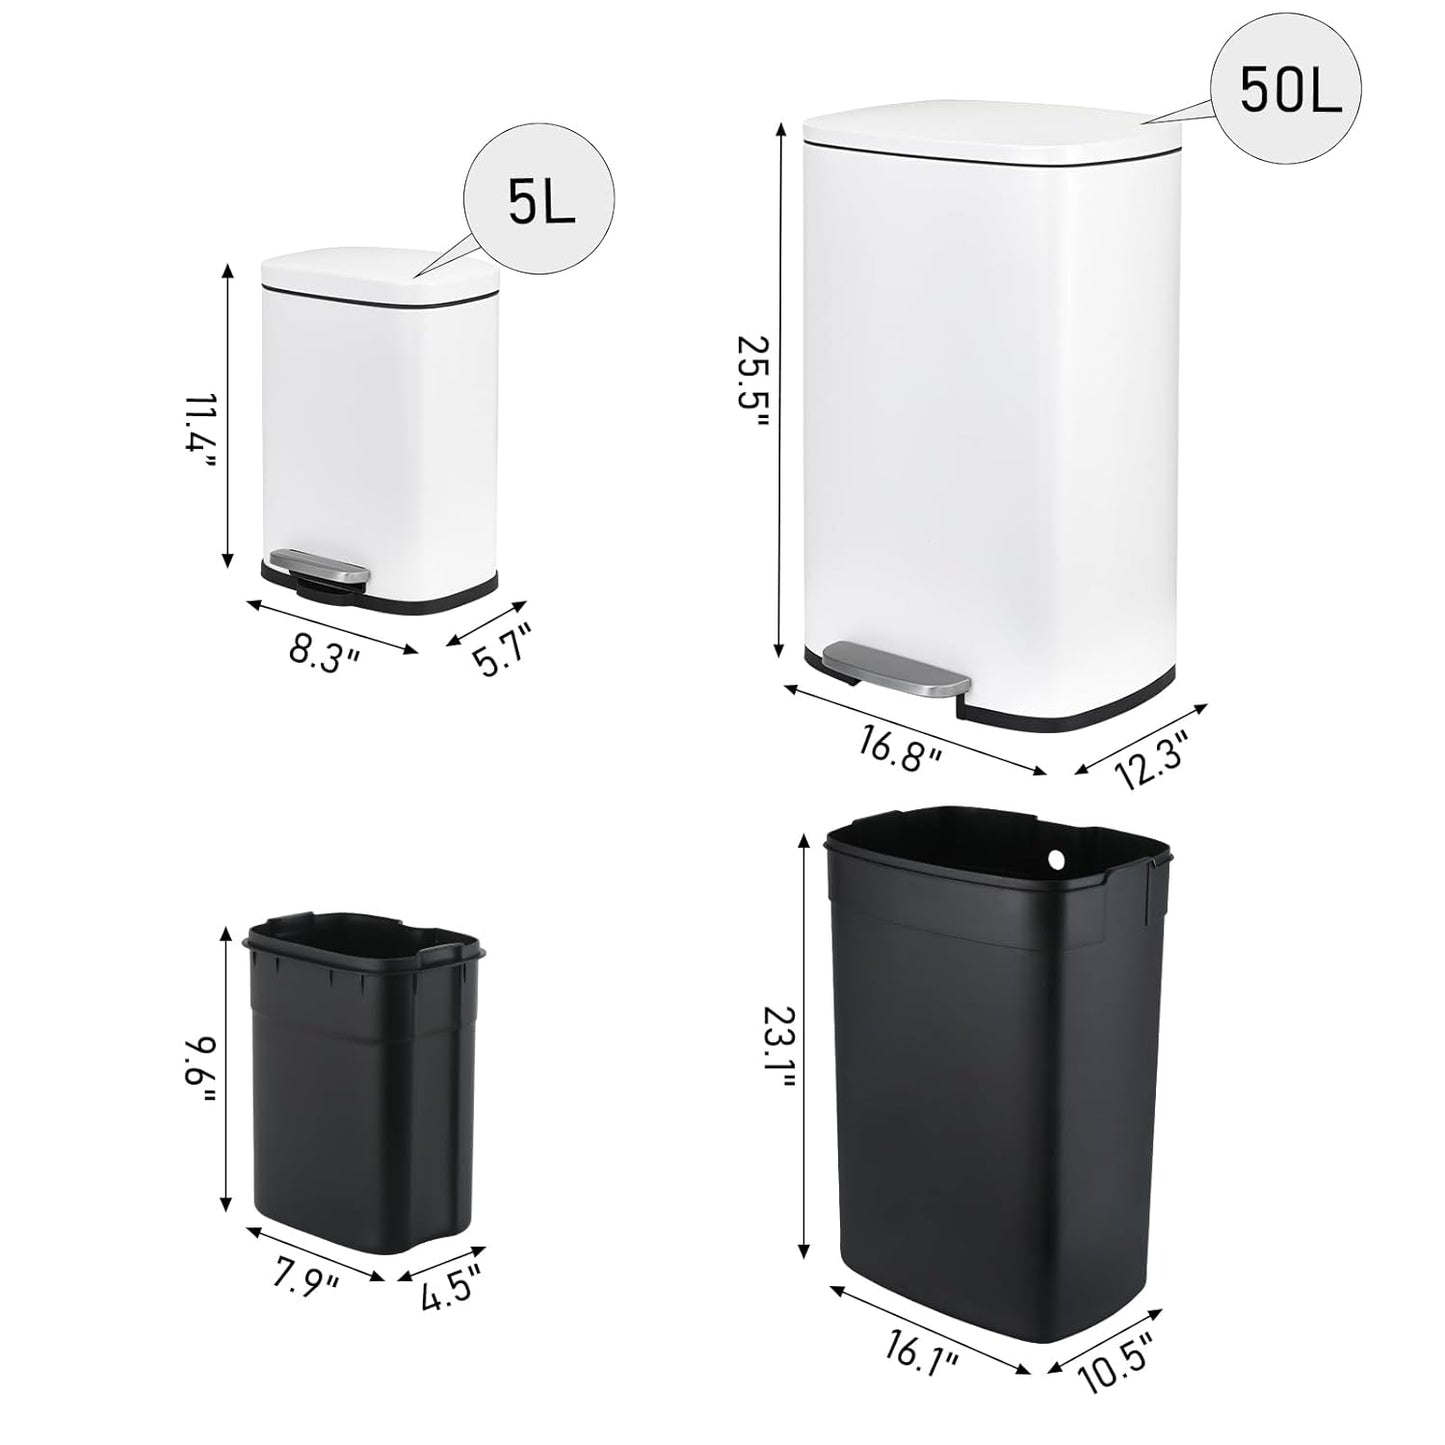 Arlopu 13.2+1.3 Gallon Step Trash Can, Stainless Steel Garbage Bin, Soft-Close Rubbish Bin with Removable Plastic Inner Bucket, Fingerprint-Proof Dustbin, for Kitchen